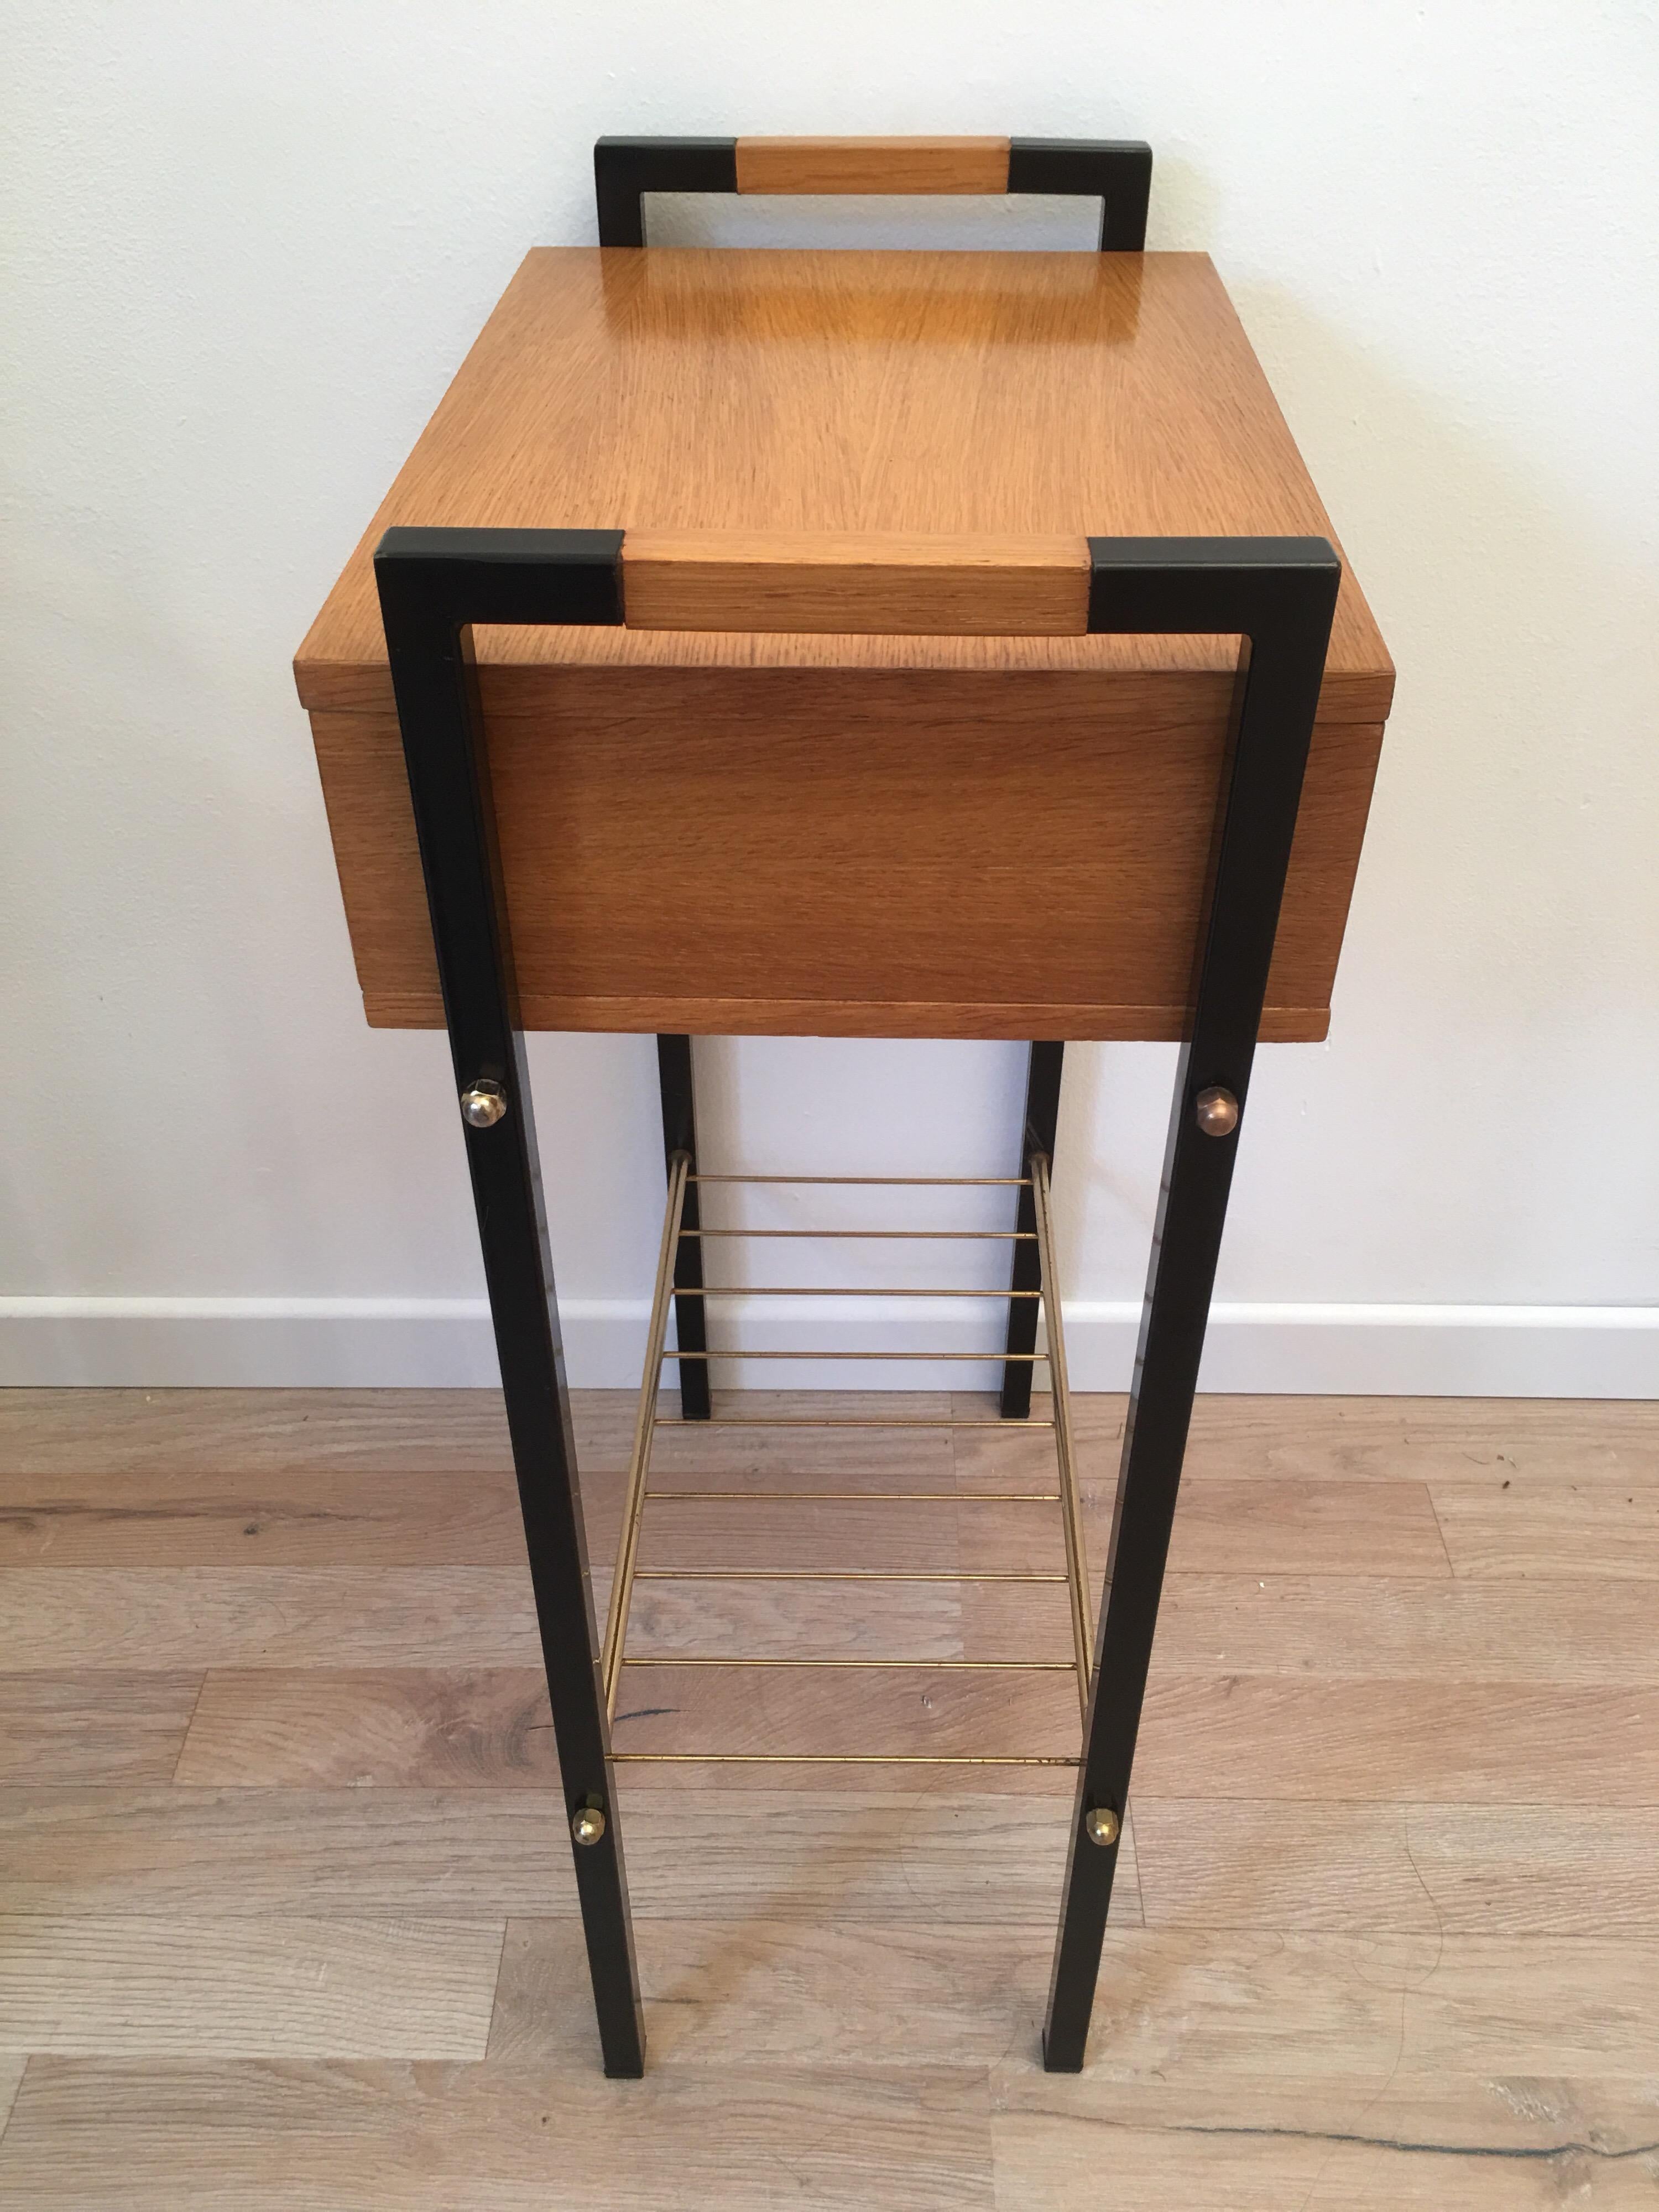 Pair of Ash and Black Metal Nightstands or Side Tables, French, 1960s For Sale 1